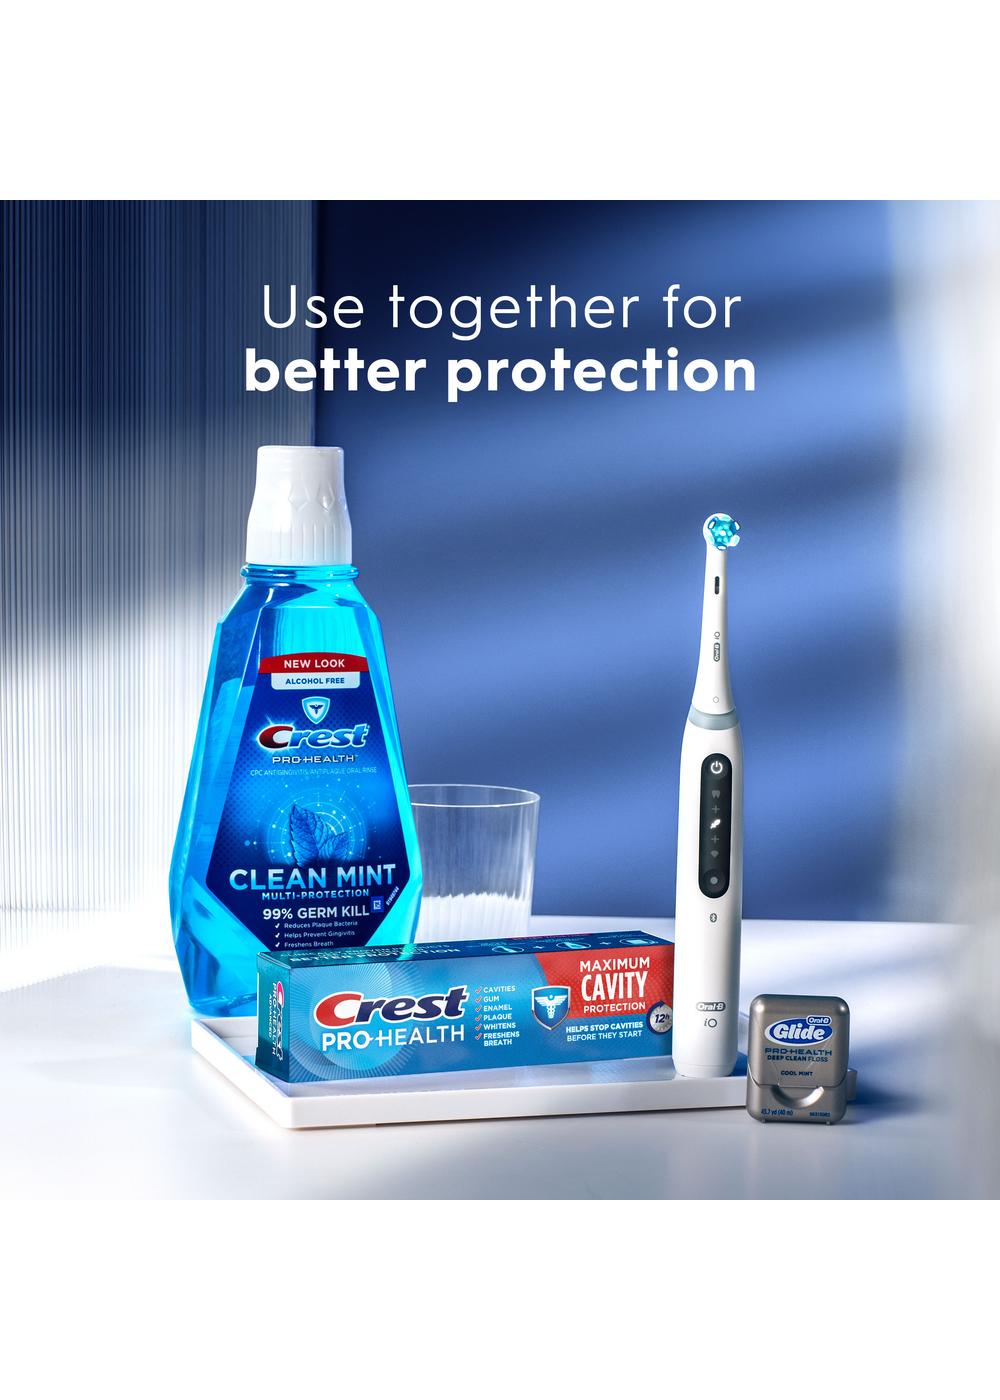 Crest Pro-Health Maximum Cavity Protection Toothpaste; image 6 of 9